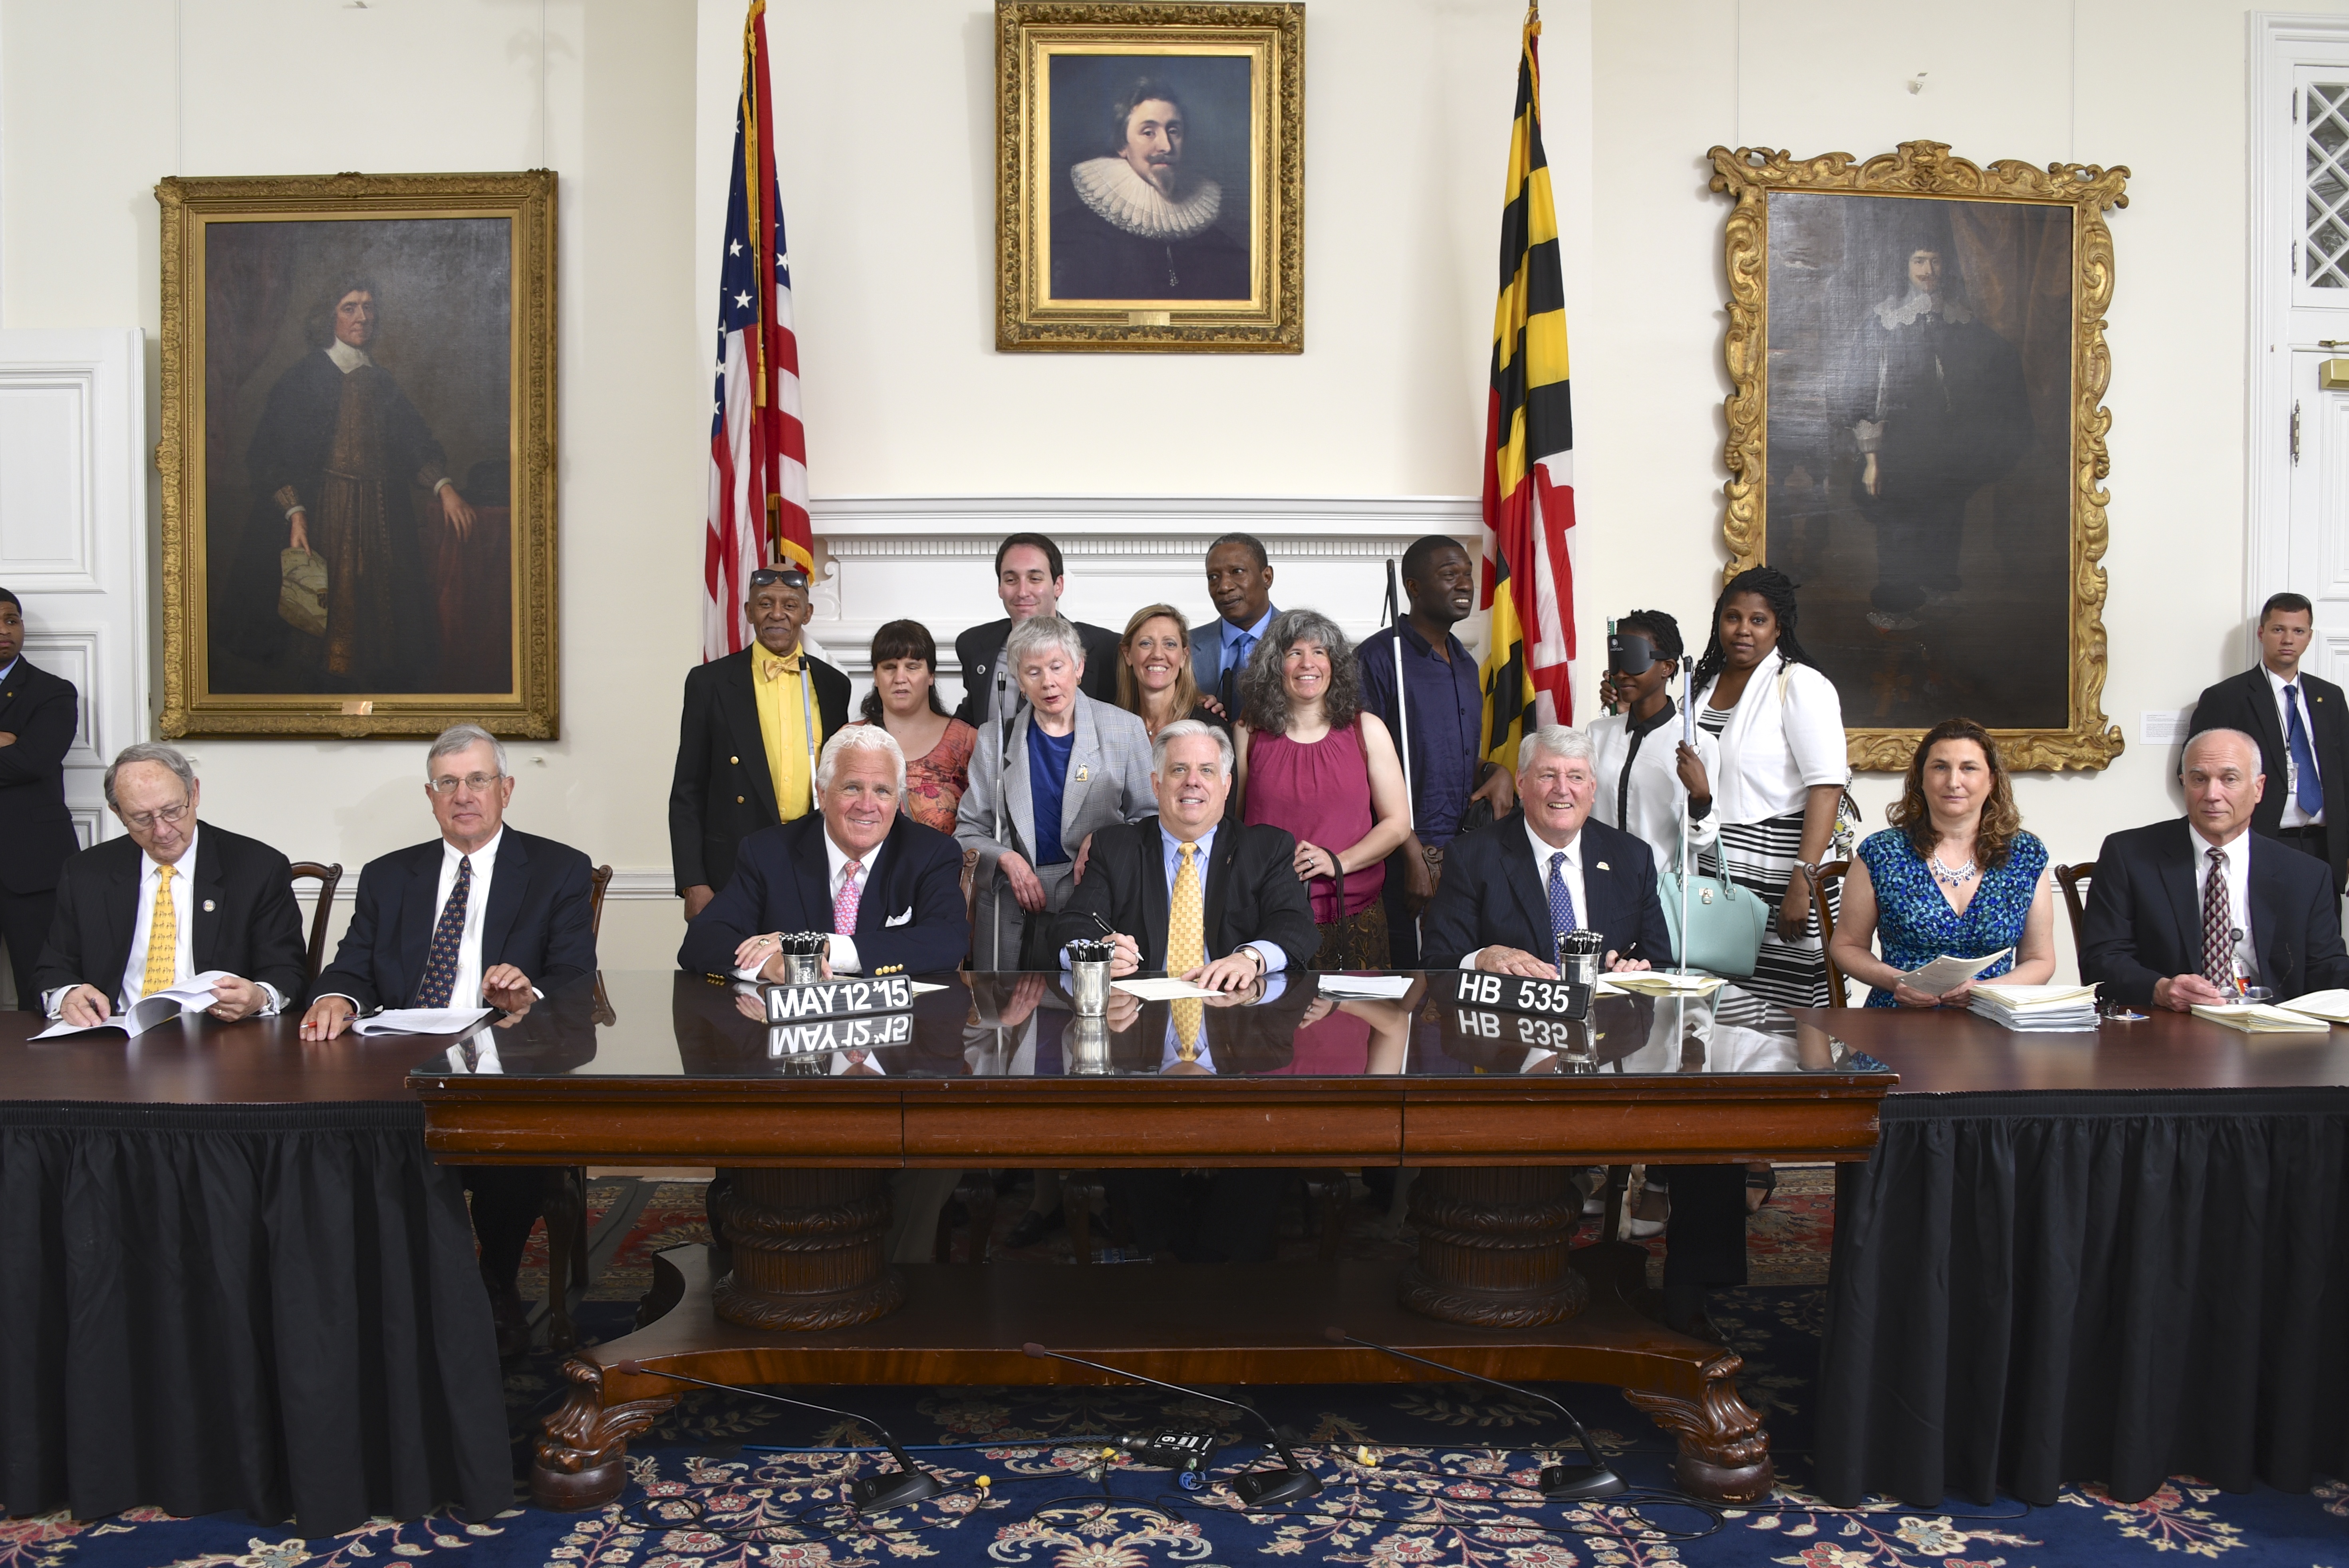 On May 12, Governor Hogan signed HB535 Orientation and Mobility Instruction for Blind Children into law as Federationists looked on.